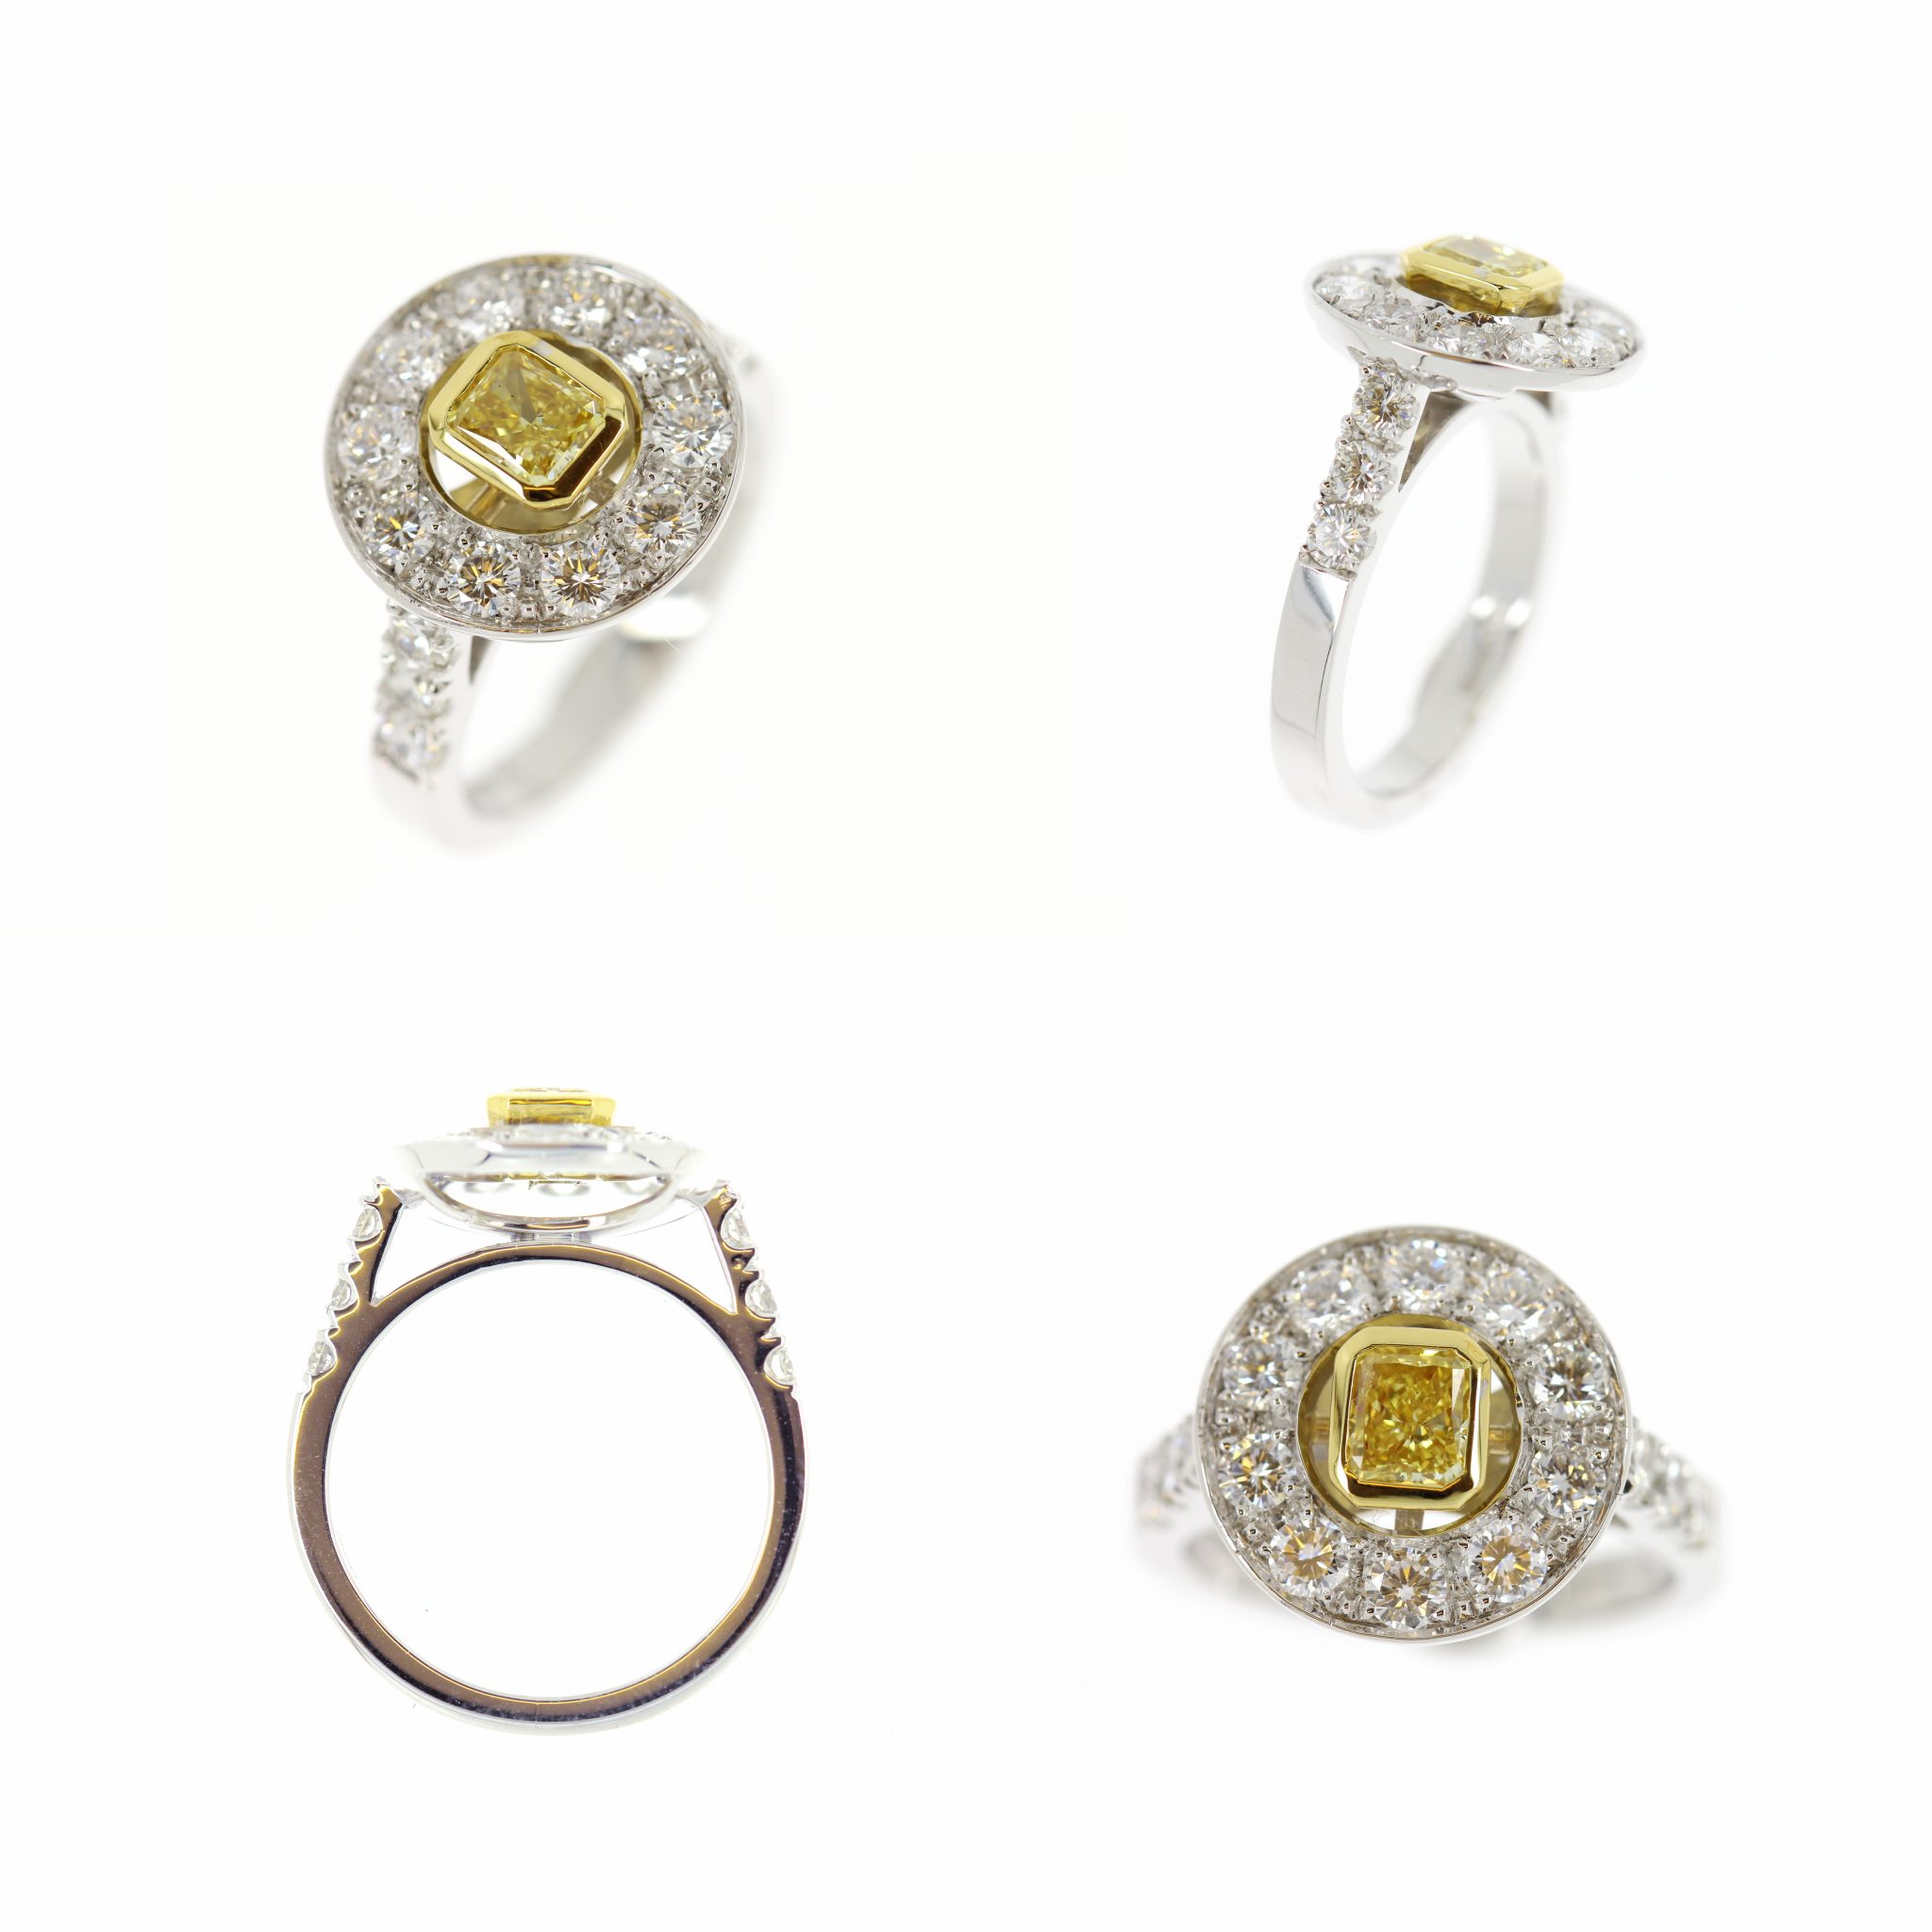 Yellow and white diamond ring set in yellow and white gold